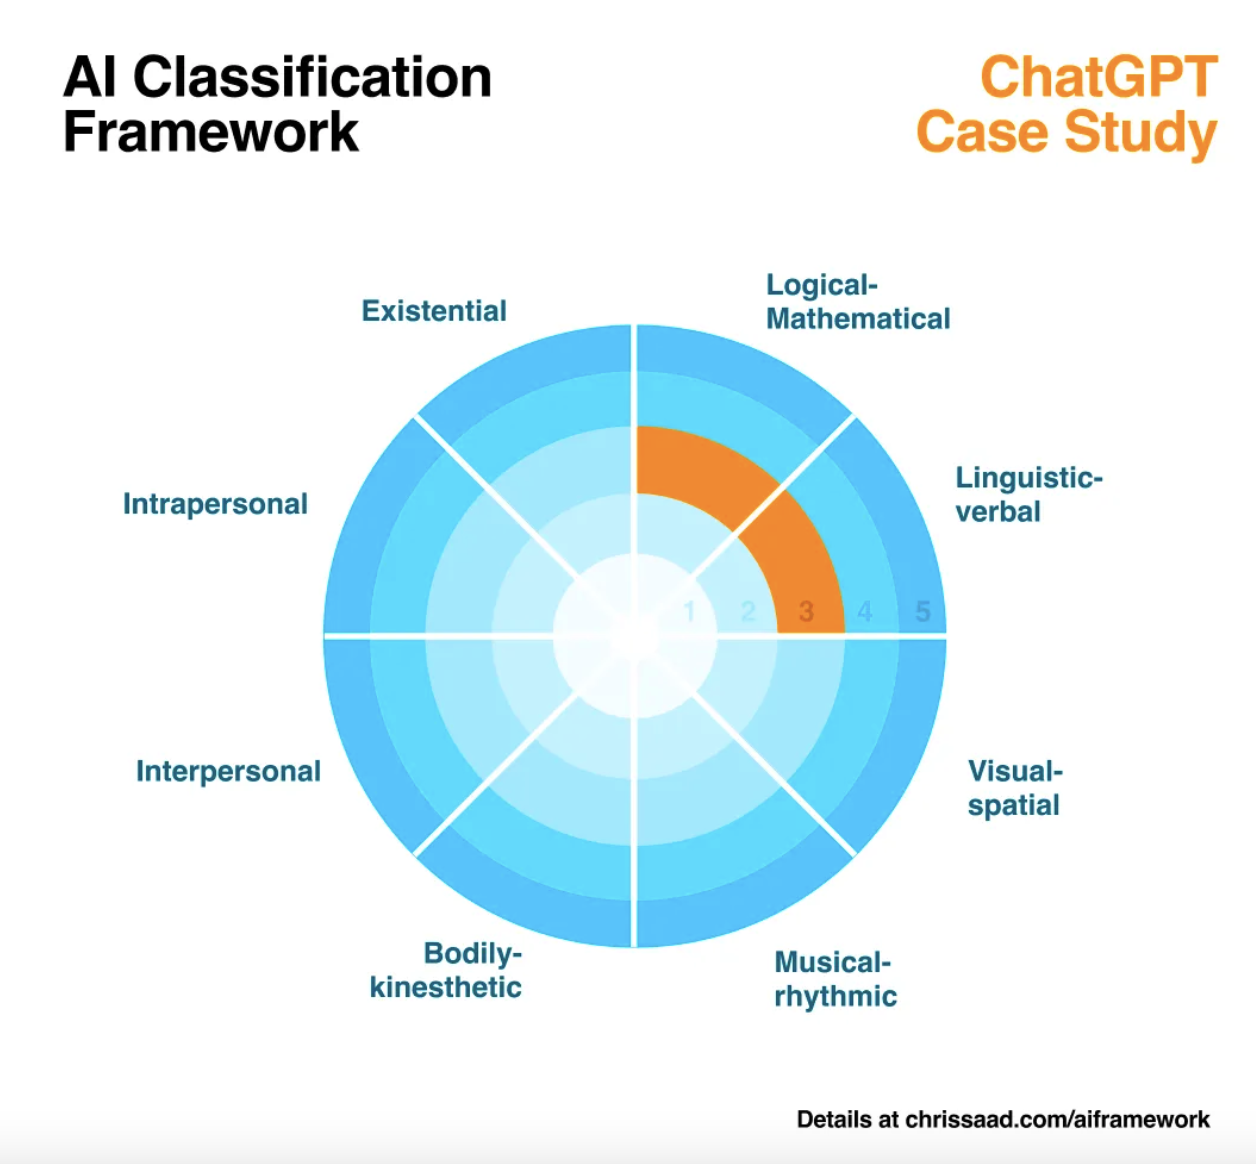 Capabilities of ChatGPT mapped onto AI Classification Framework by Chris Saad